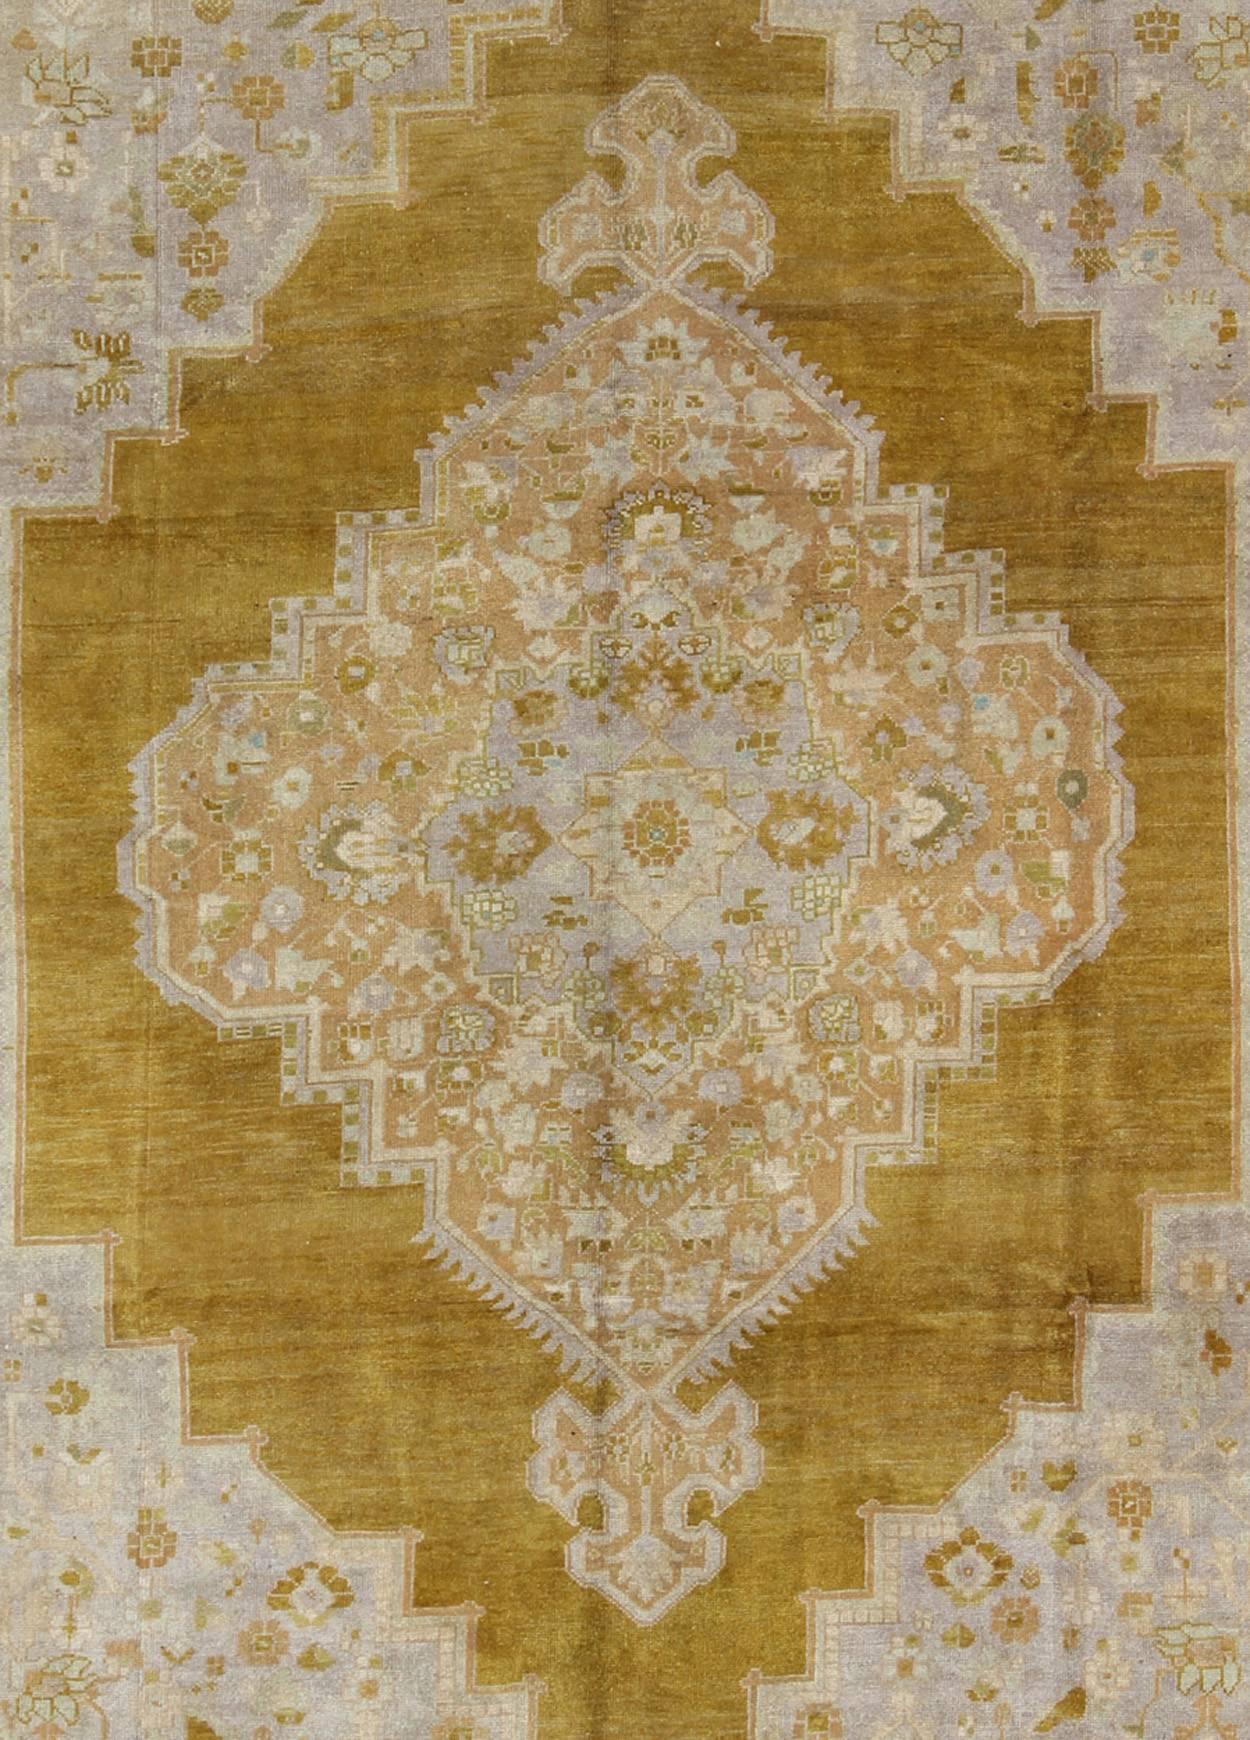 Hand-Knotted Vintage Turkish Oushak Rug in Saturated Gold And Warm Neutral Colors